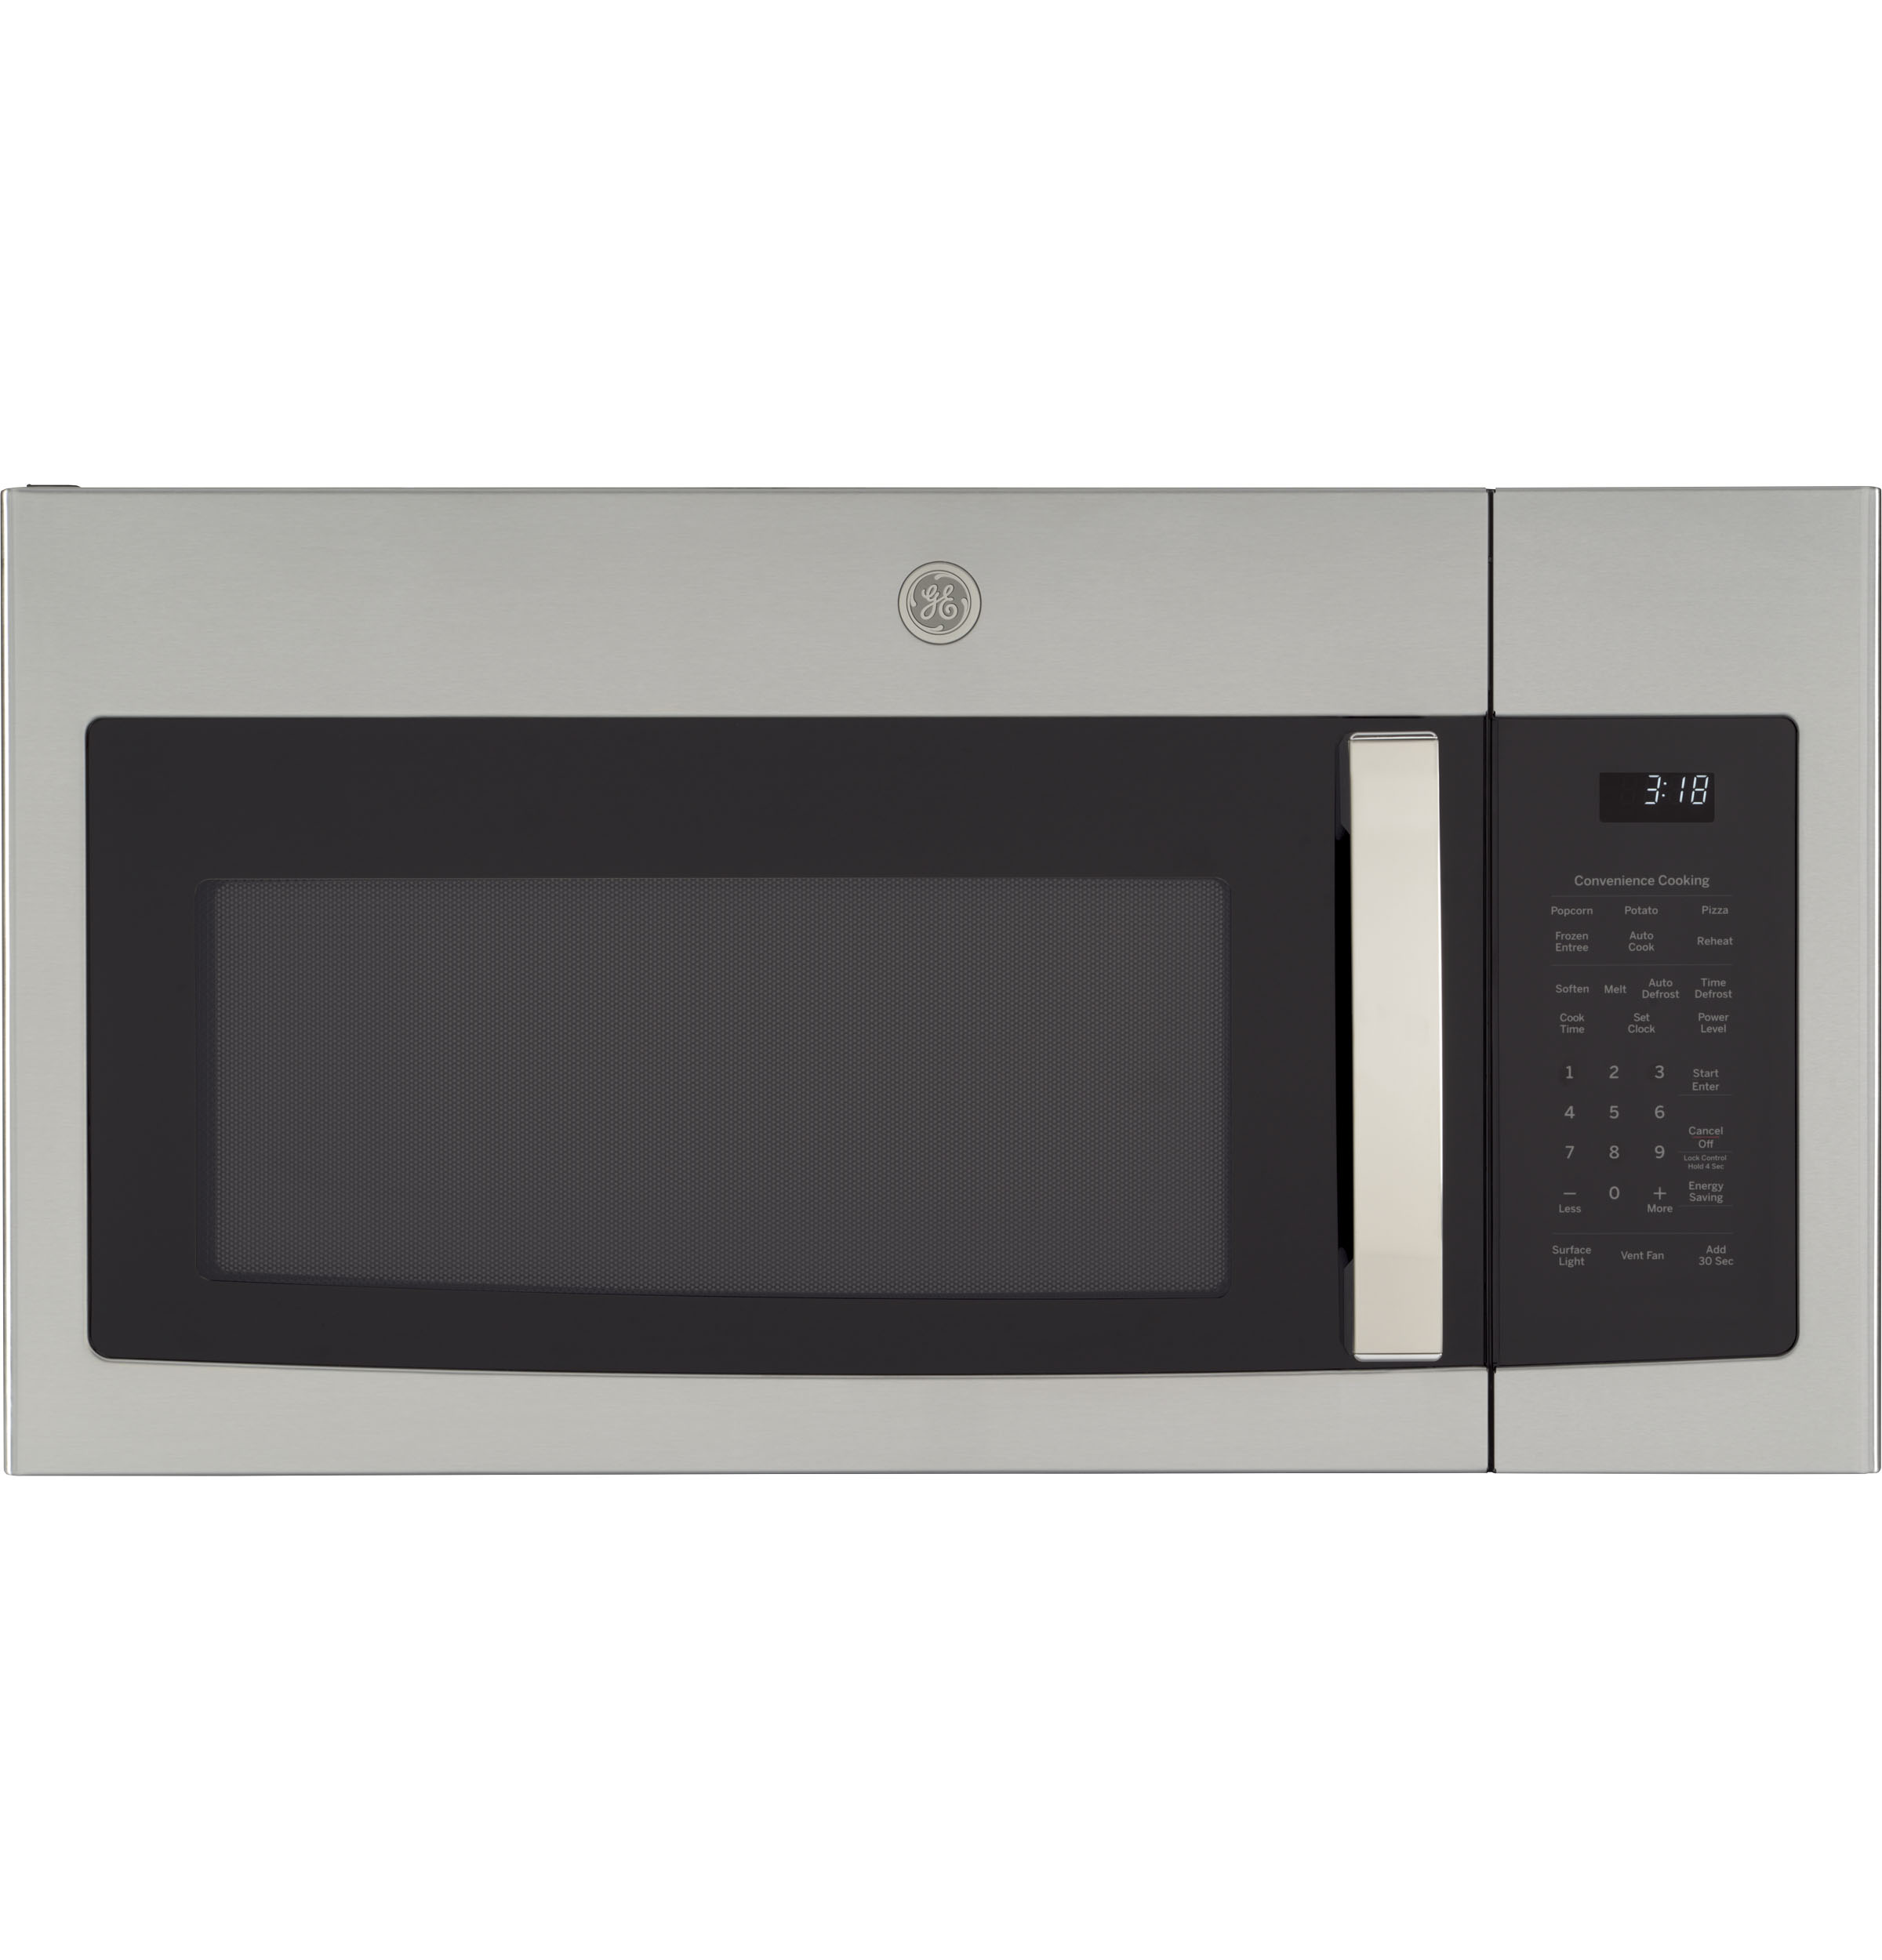 GE® 1.8 Cu. Ft. Over-the-Range Microwave Oven with Recirculating Venting